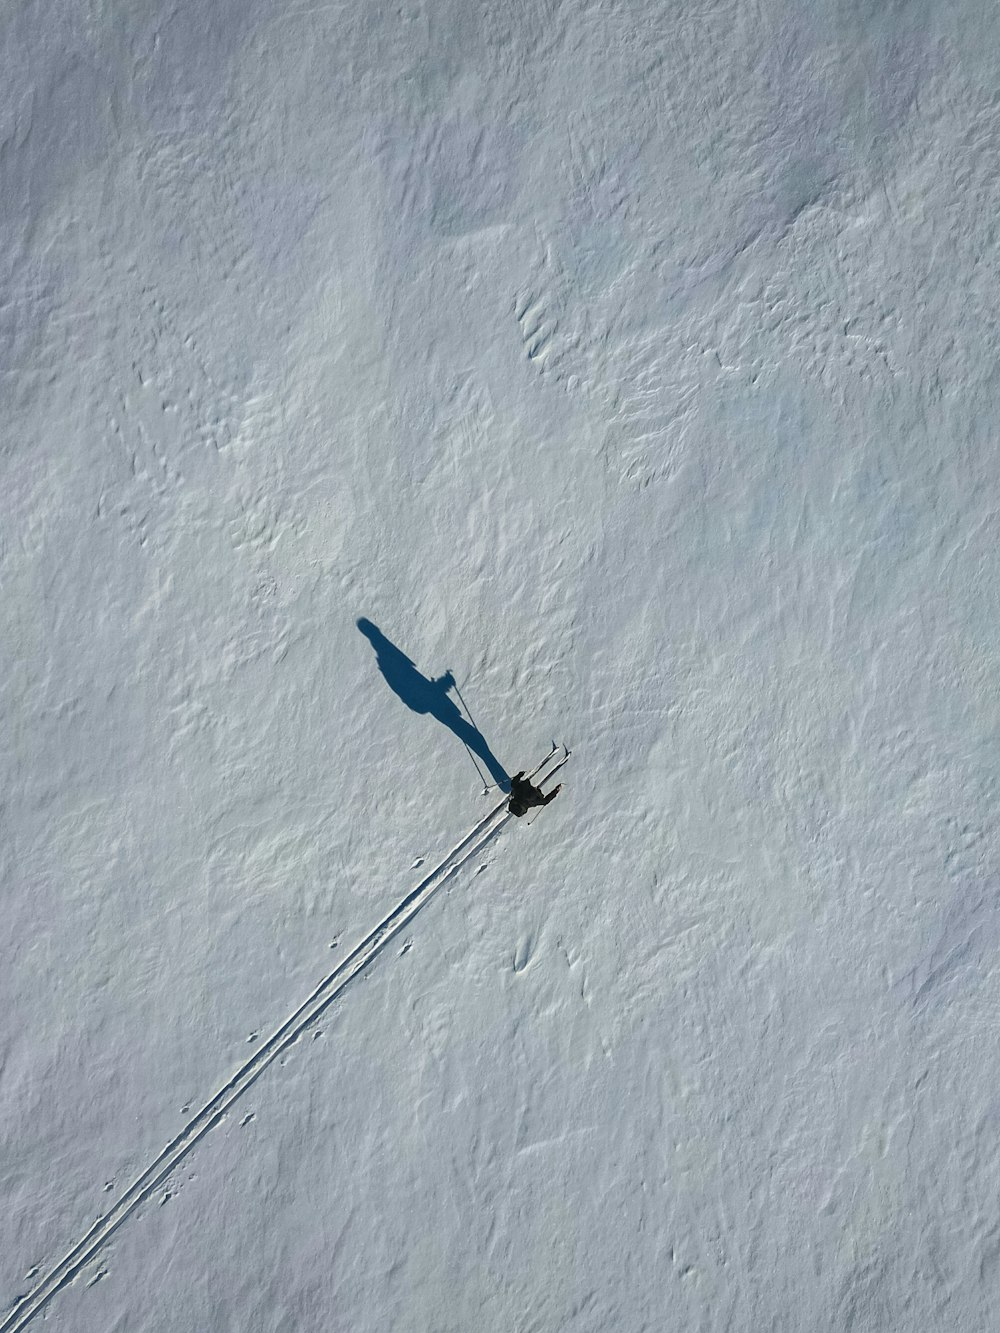 a person on skis in the snow